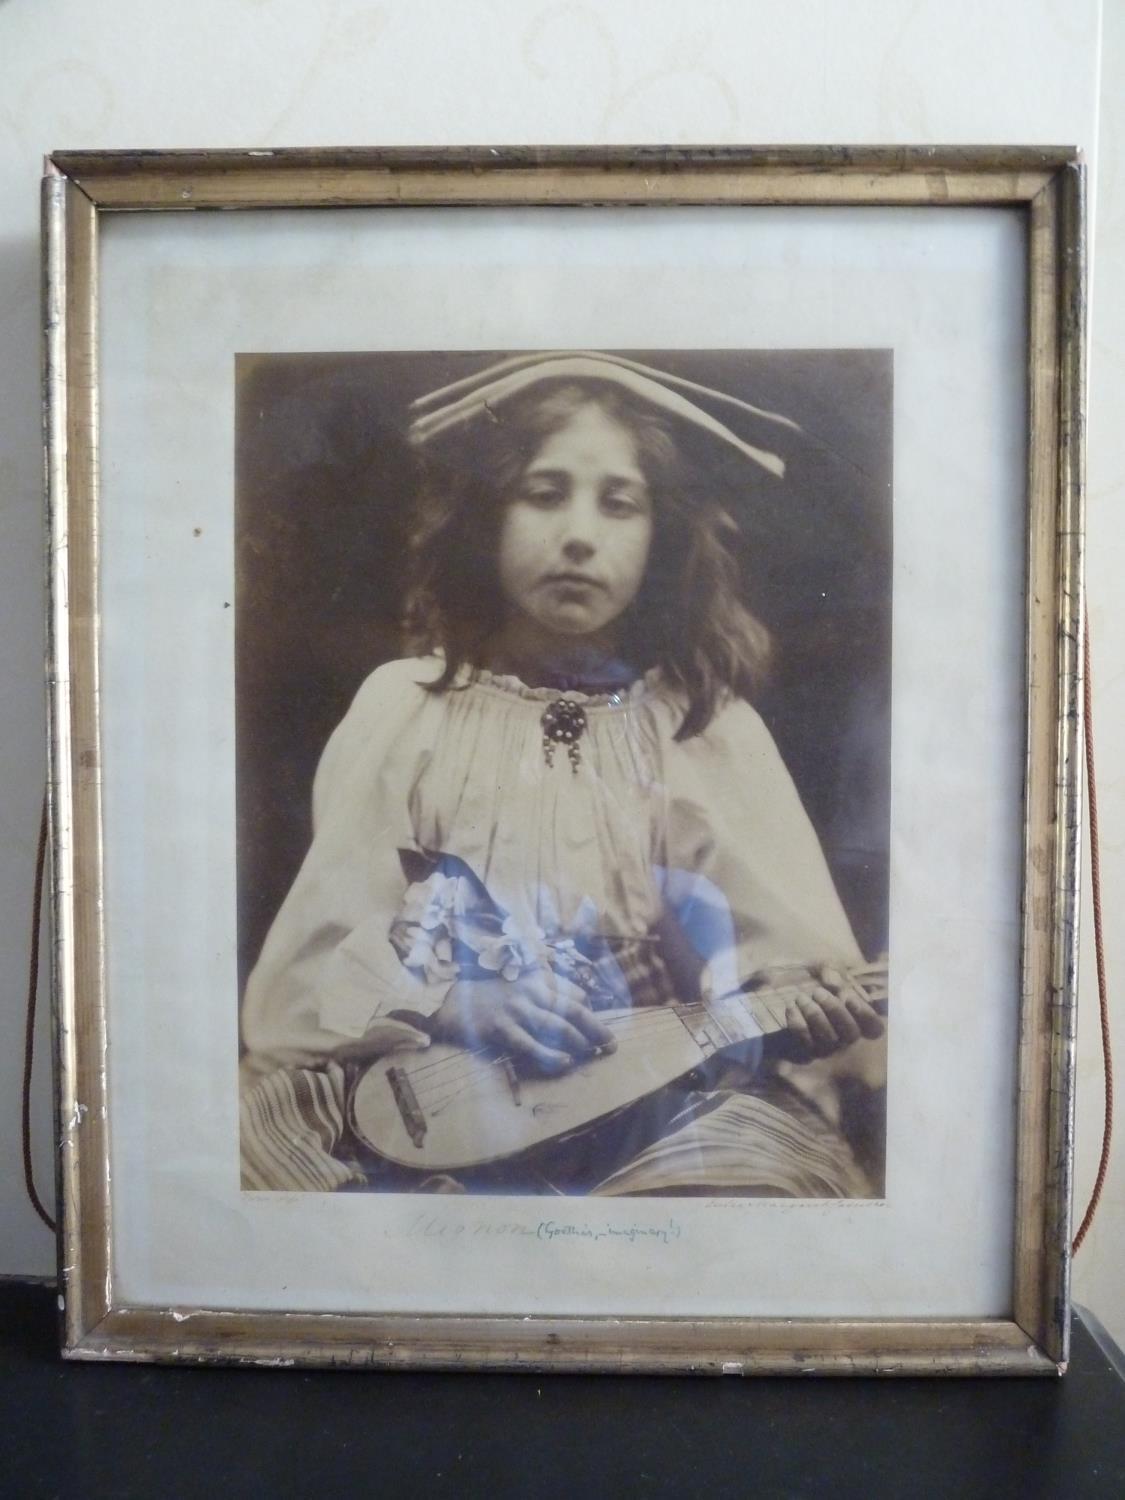 Julia Margaret Cameron - An Early photograph, Mignon, of Kate Keown, from 'The Minstrel Group